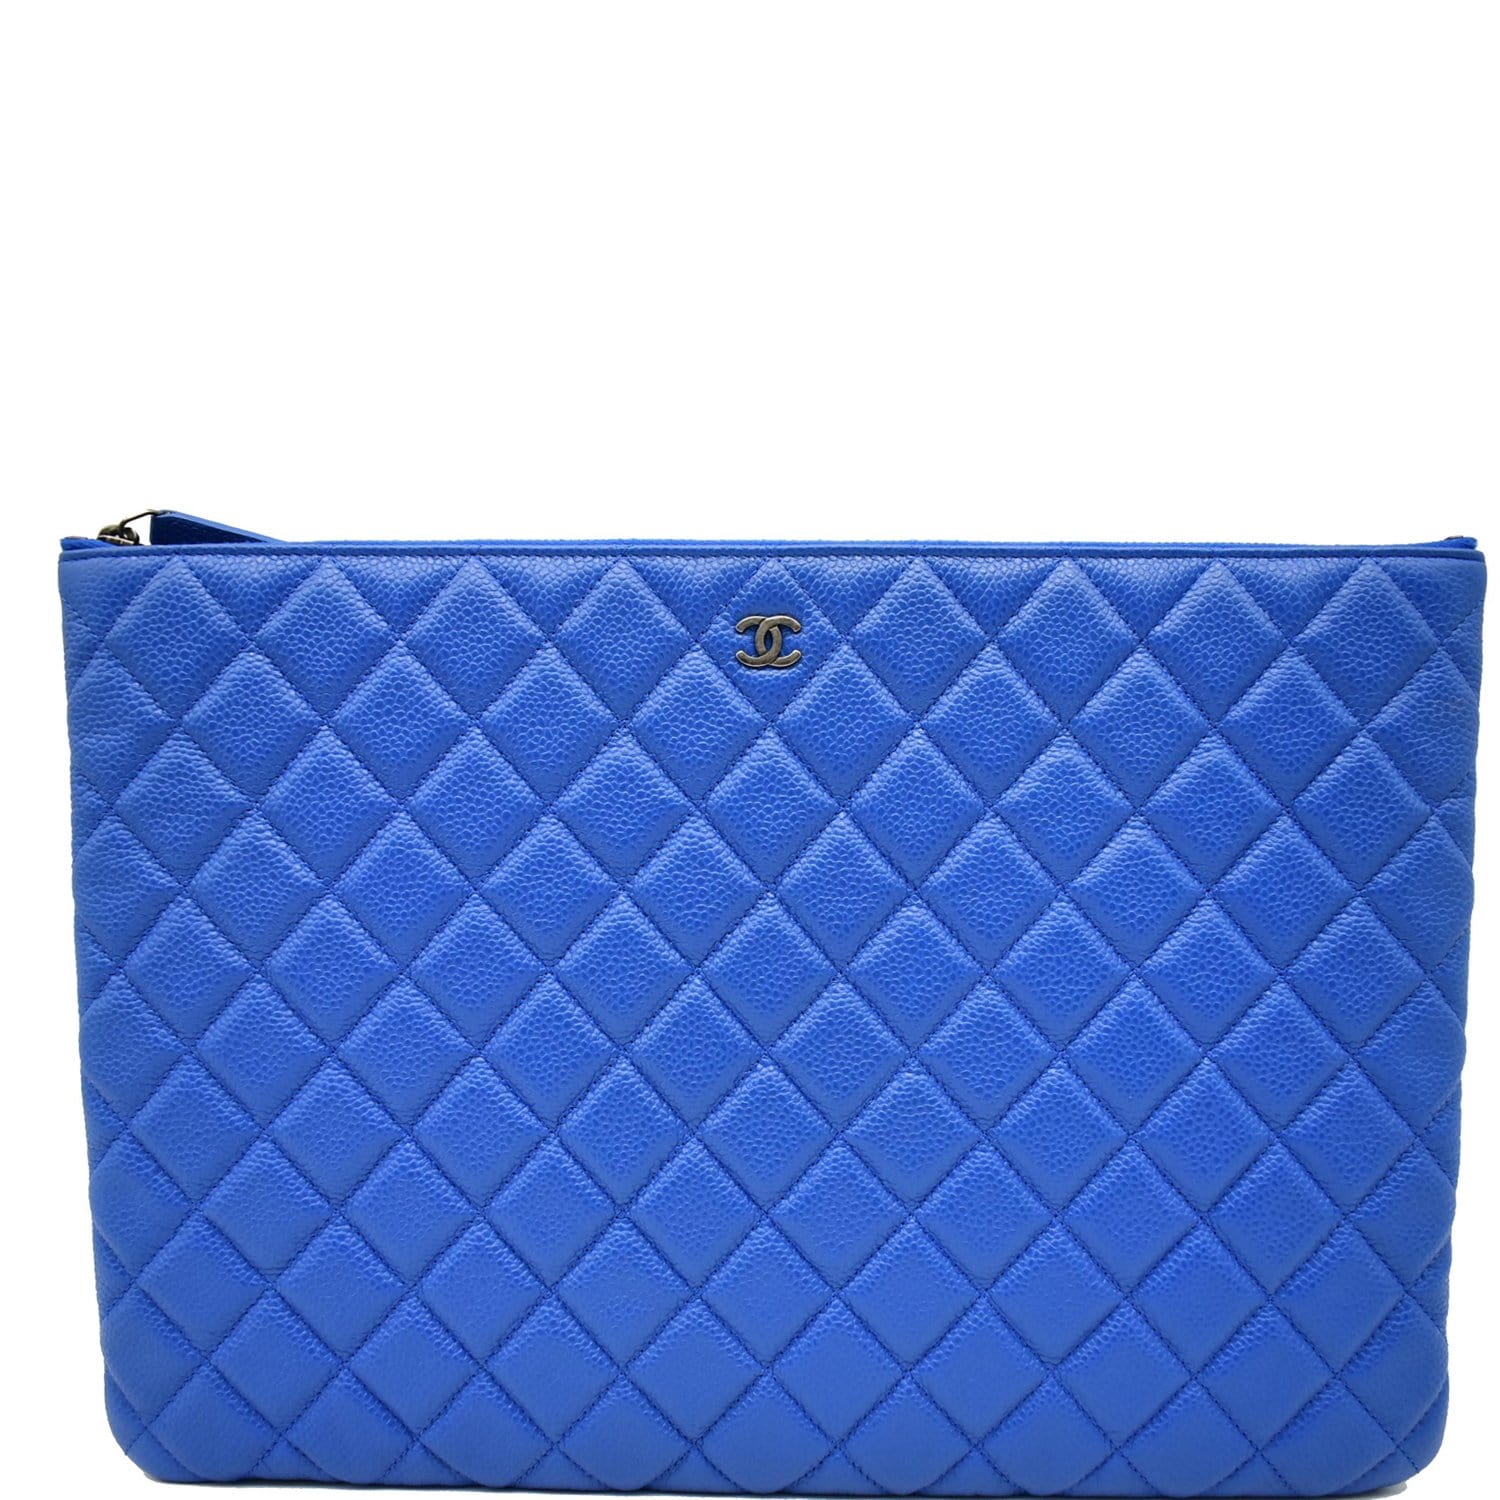 Chanel Blue Quilted Caviar Leather CC Zip Compact Wallet - Yoogi's Closet